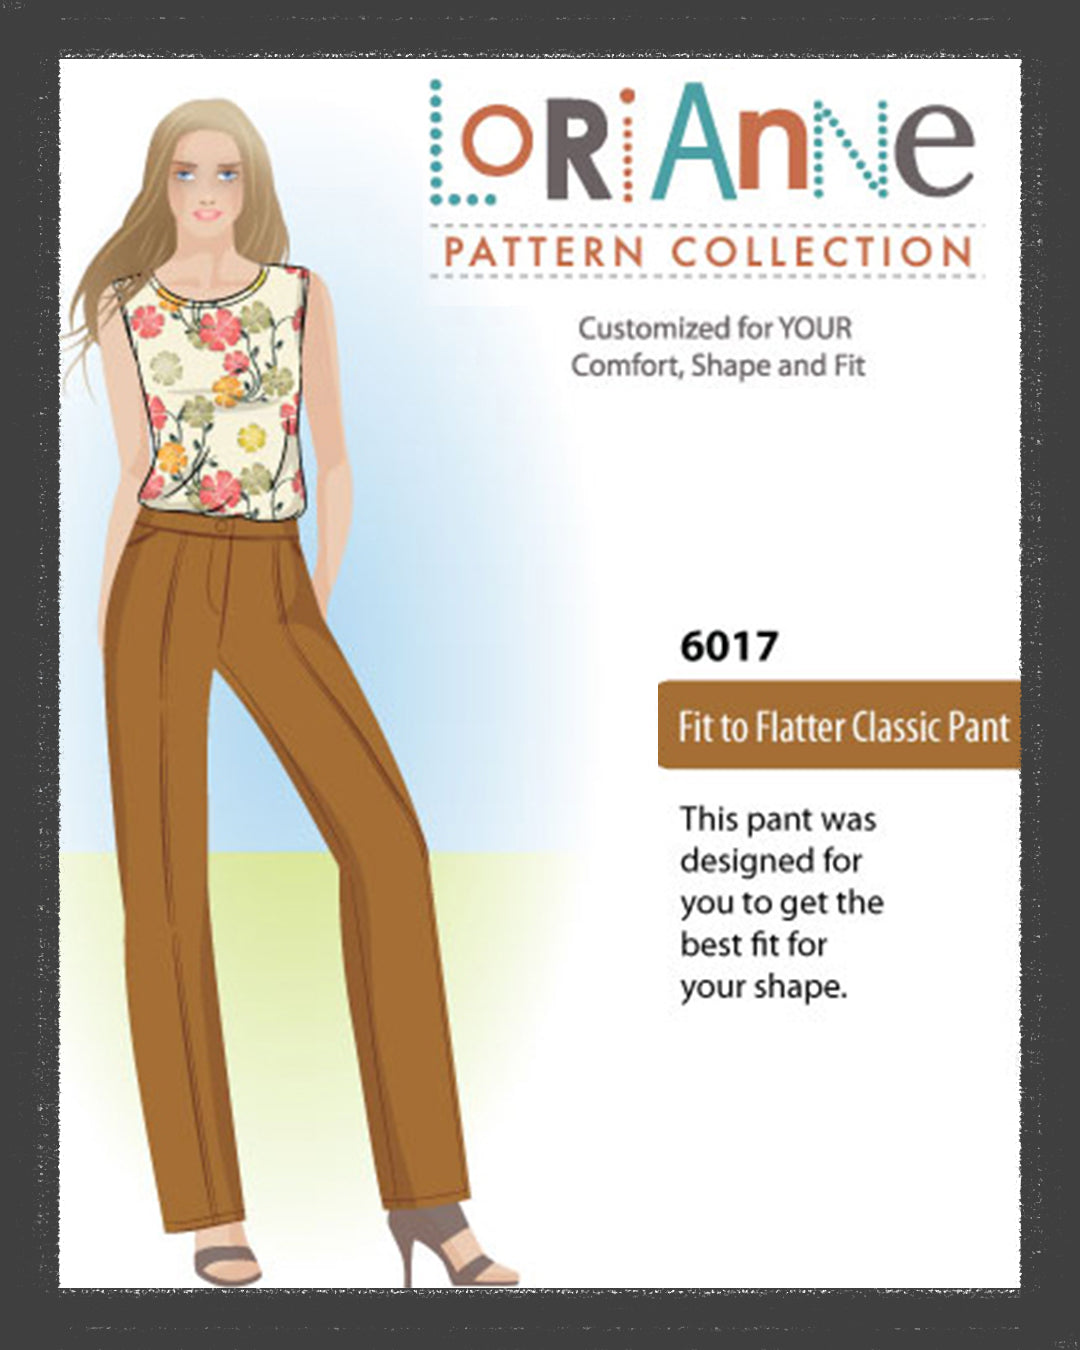 LORIANNE PATTERNS 6017 - FIT TO FLATTER CLASSIC PANT (PRINTED)